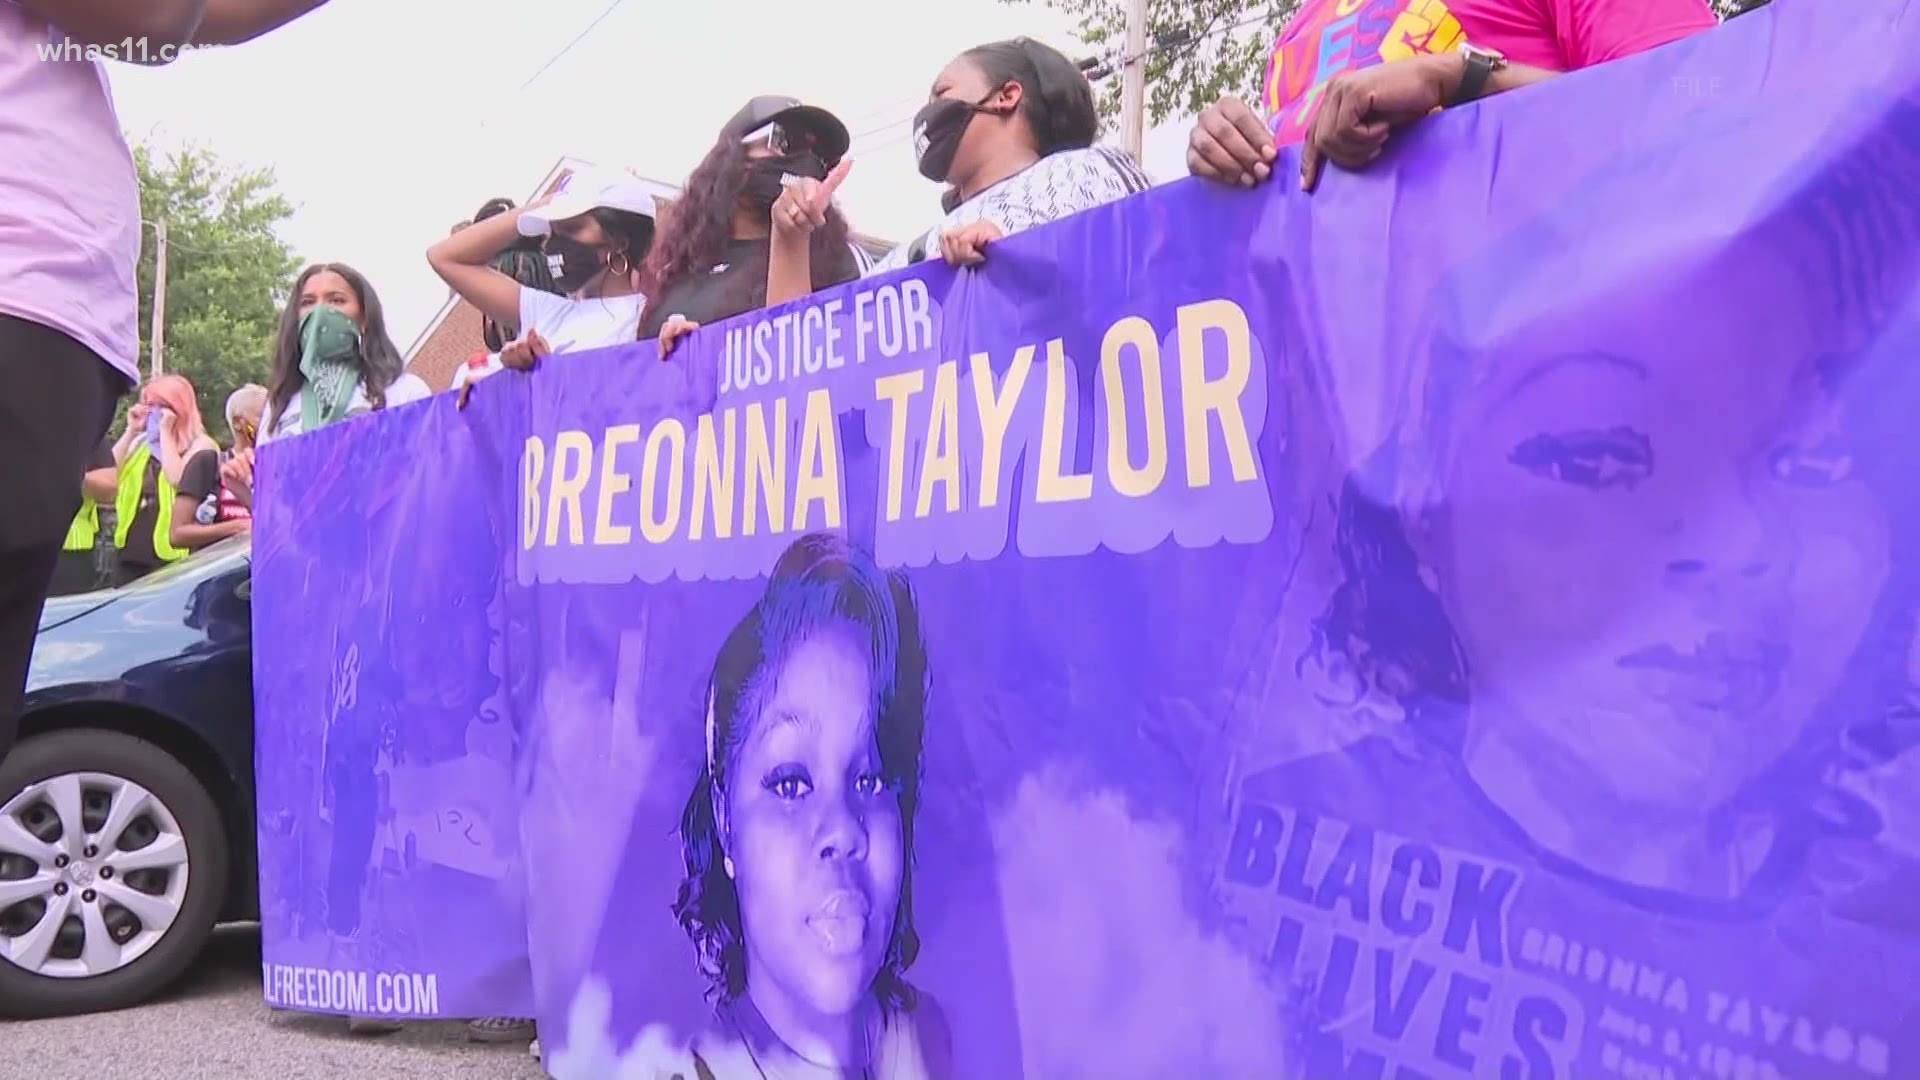 As the investigation continues some protesters are growing tired of the delay as they continue demanding justice for Breonna Taylor.